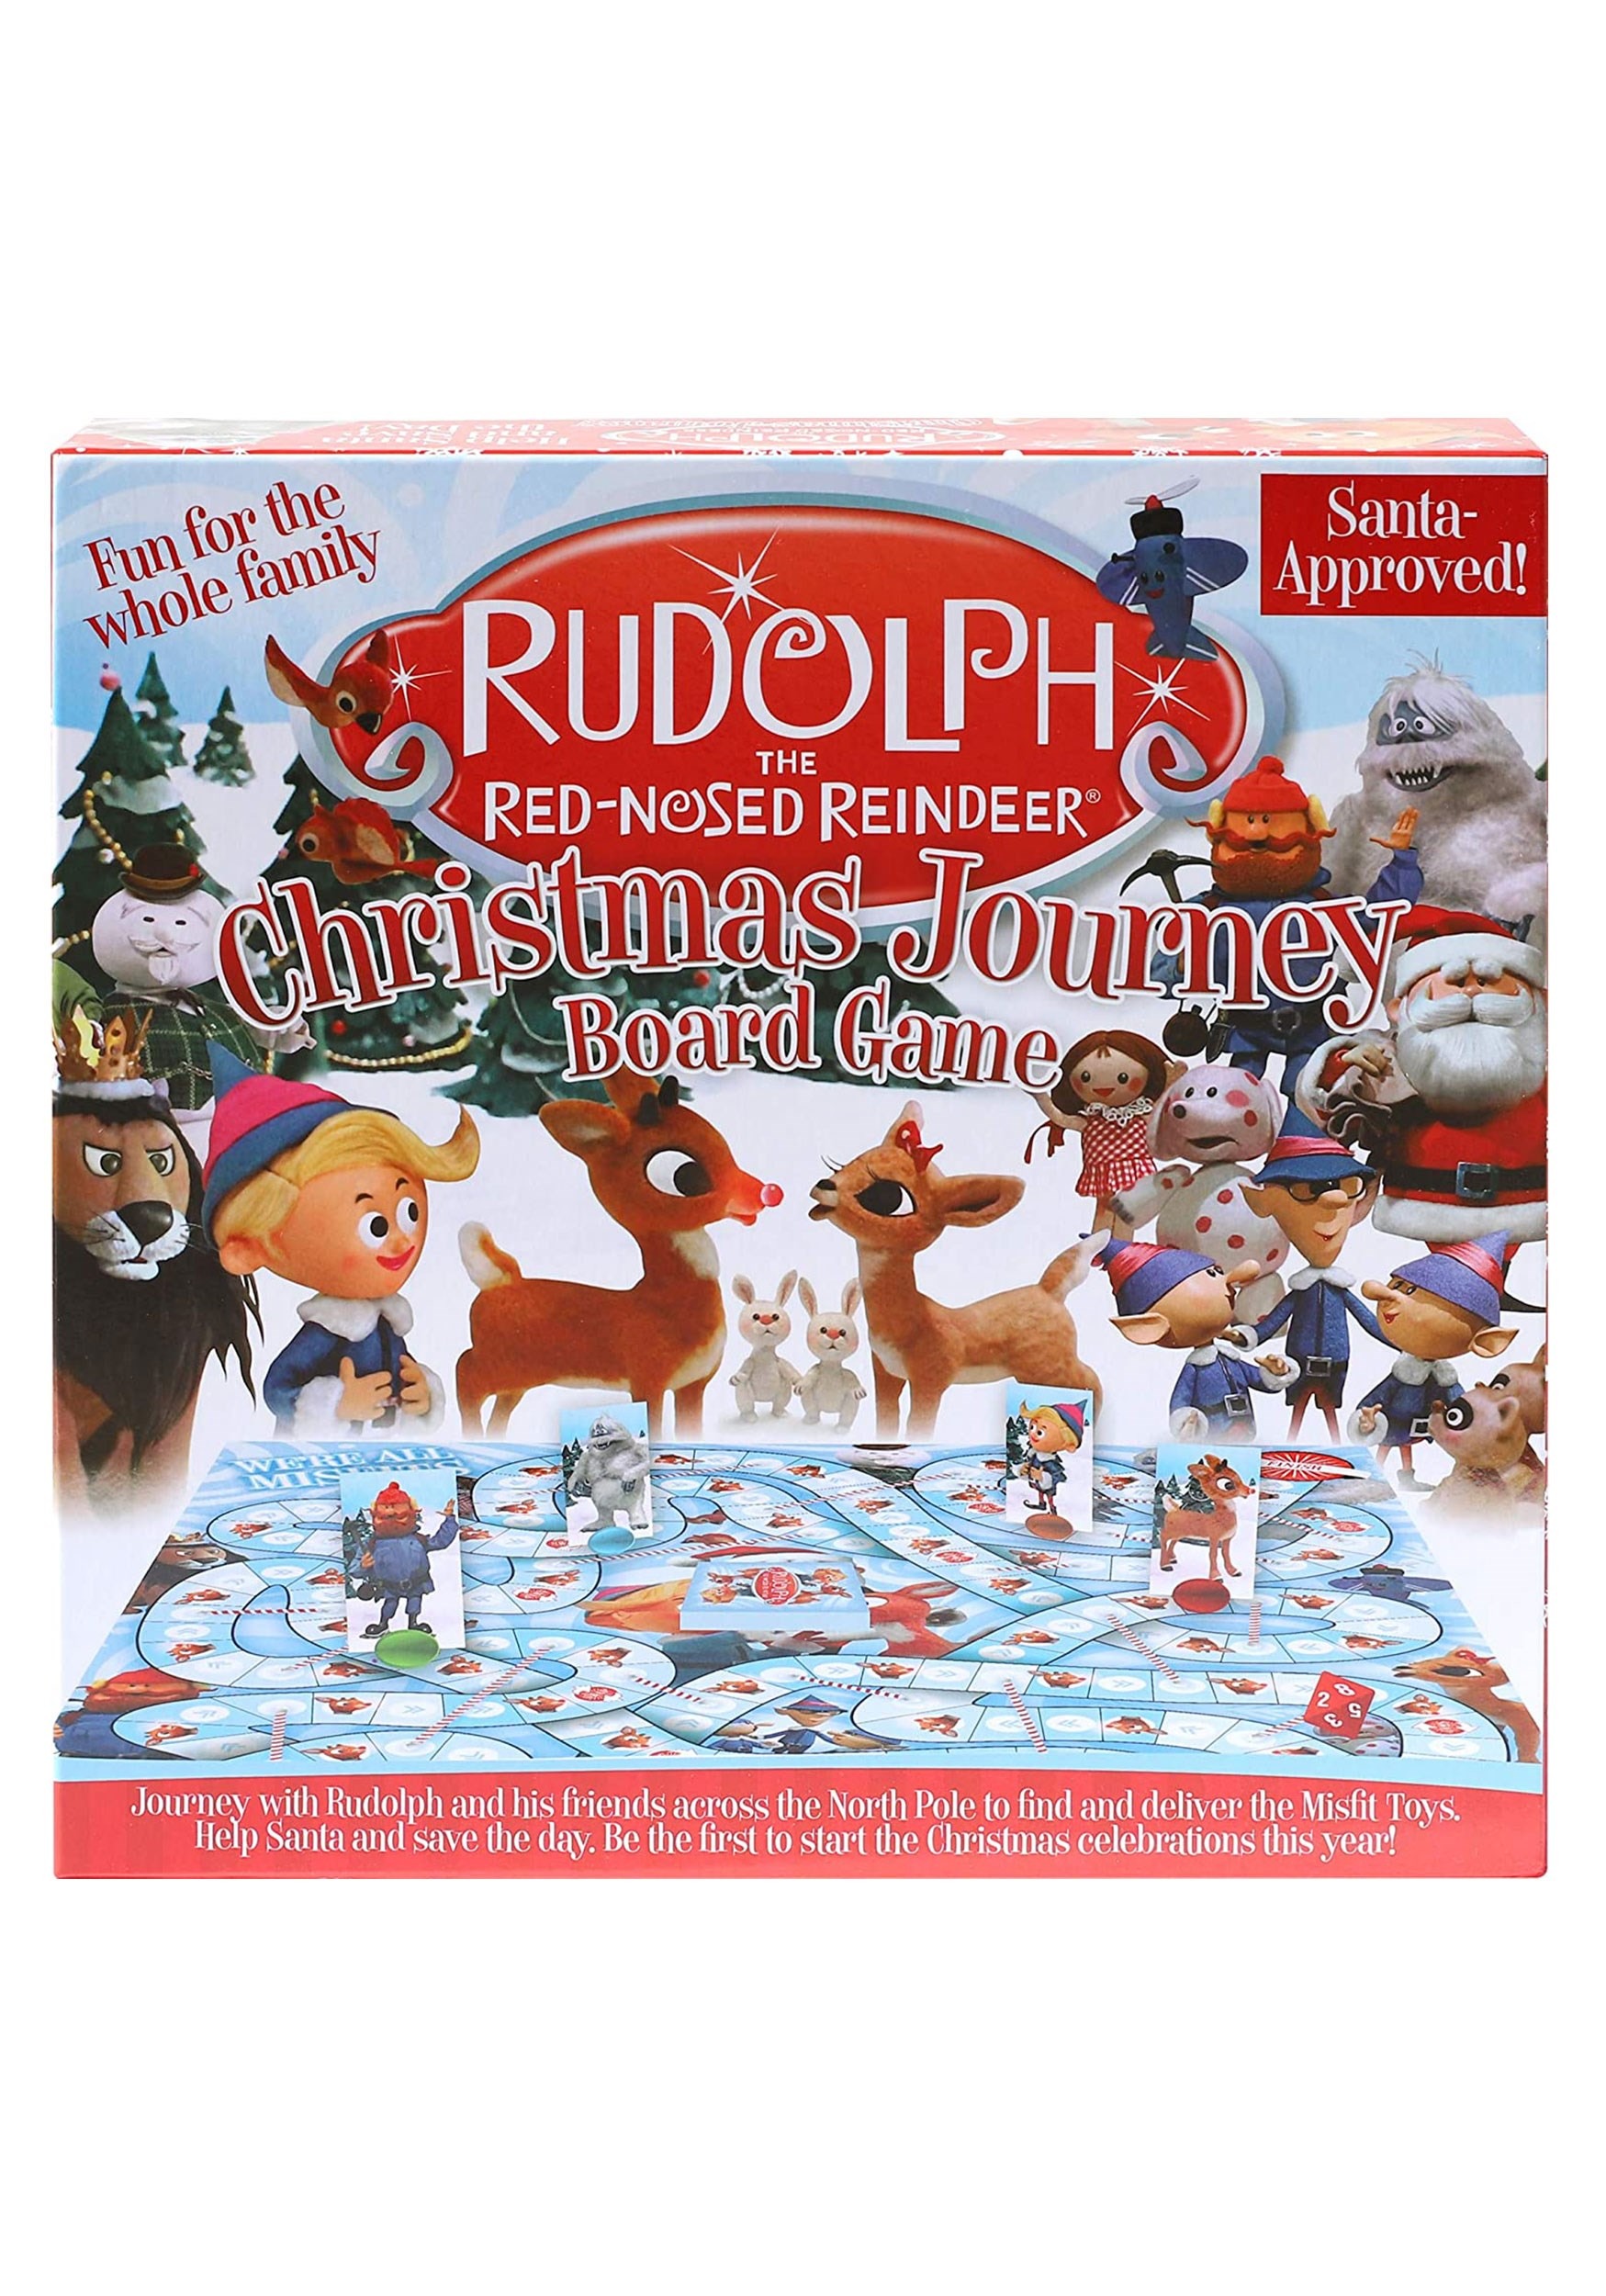 Christmas Journey Rudolph the Red-Nosed Reindeer Board Game